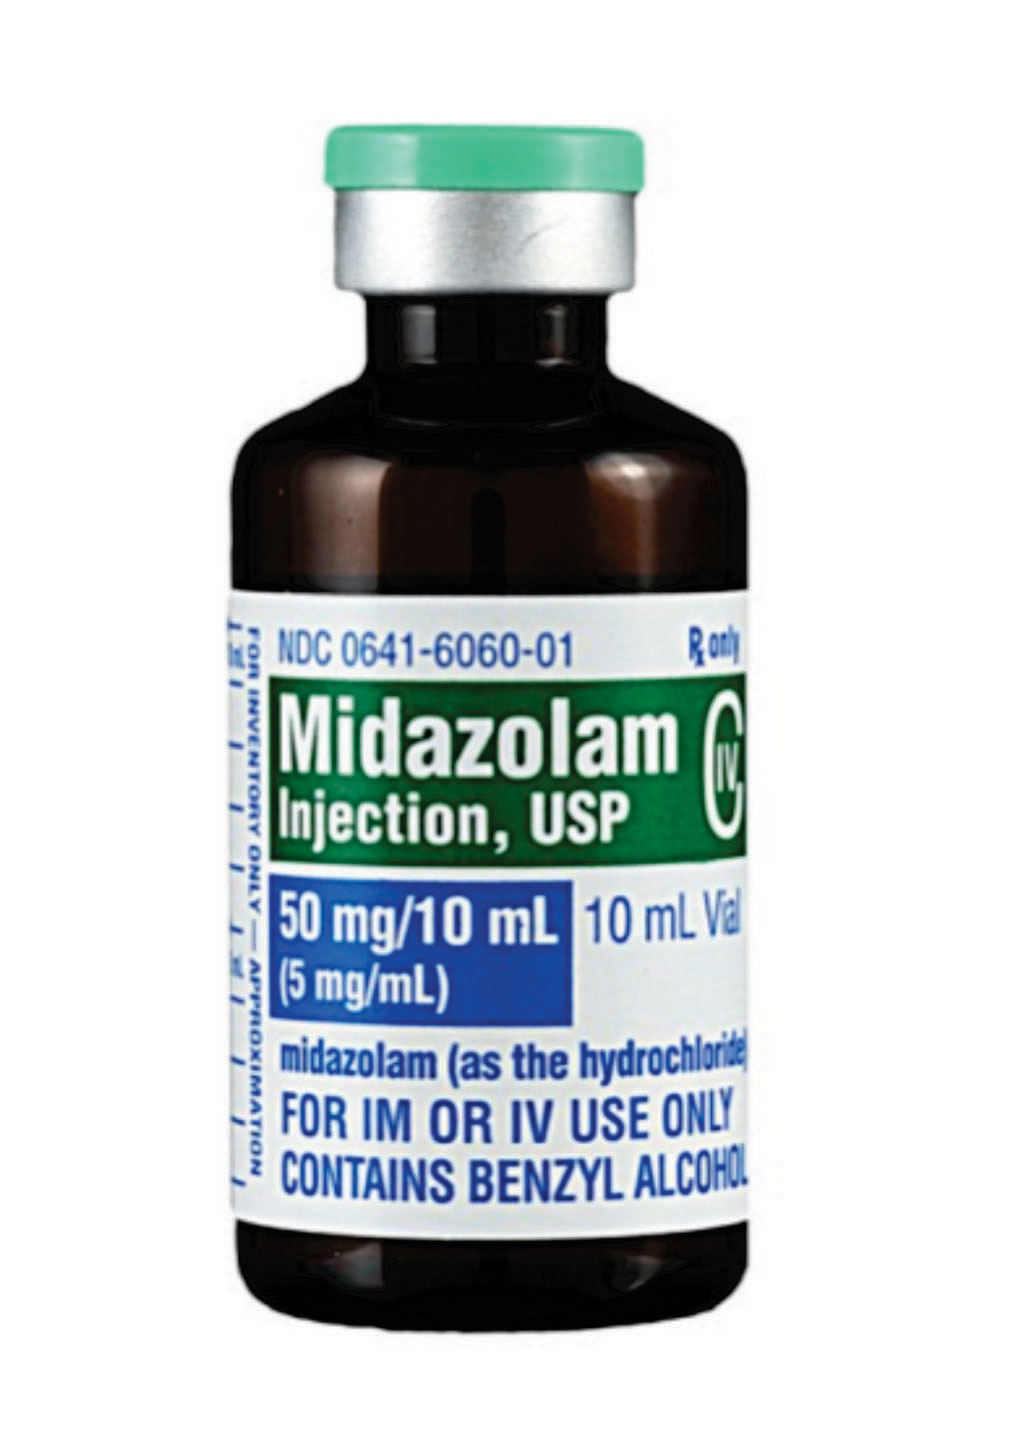 Image: Midazolam, a drug used to give symptom relief in palliative care to terminal patients (Photo courtesy of WebMD).